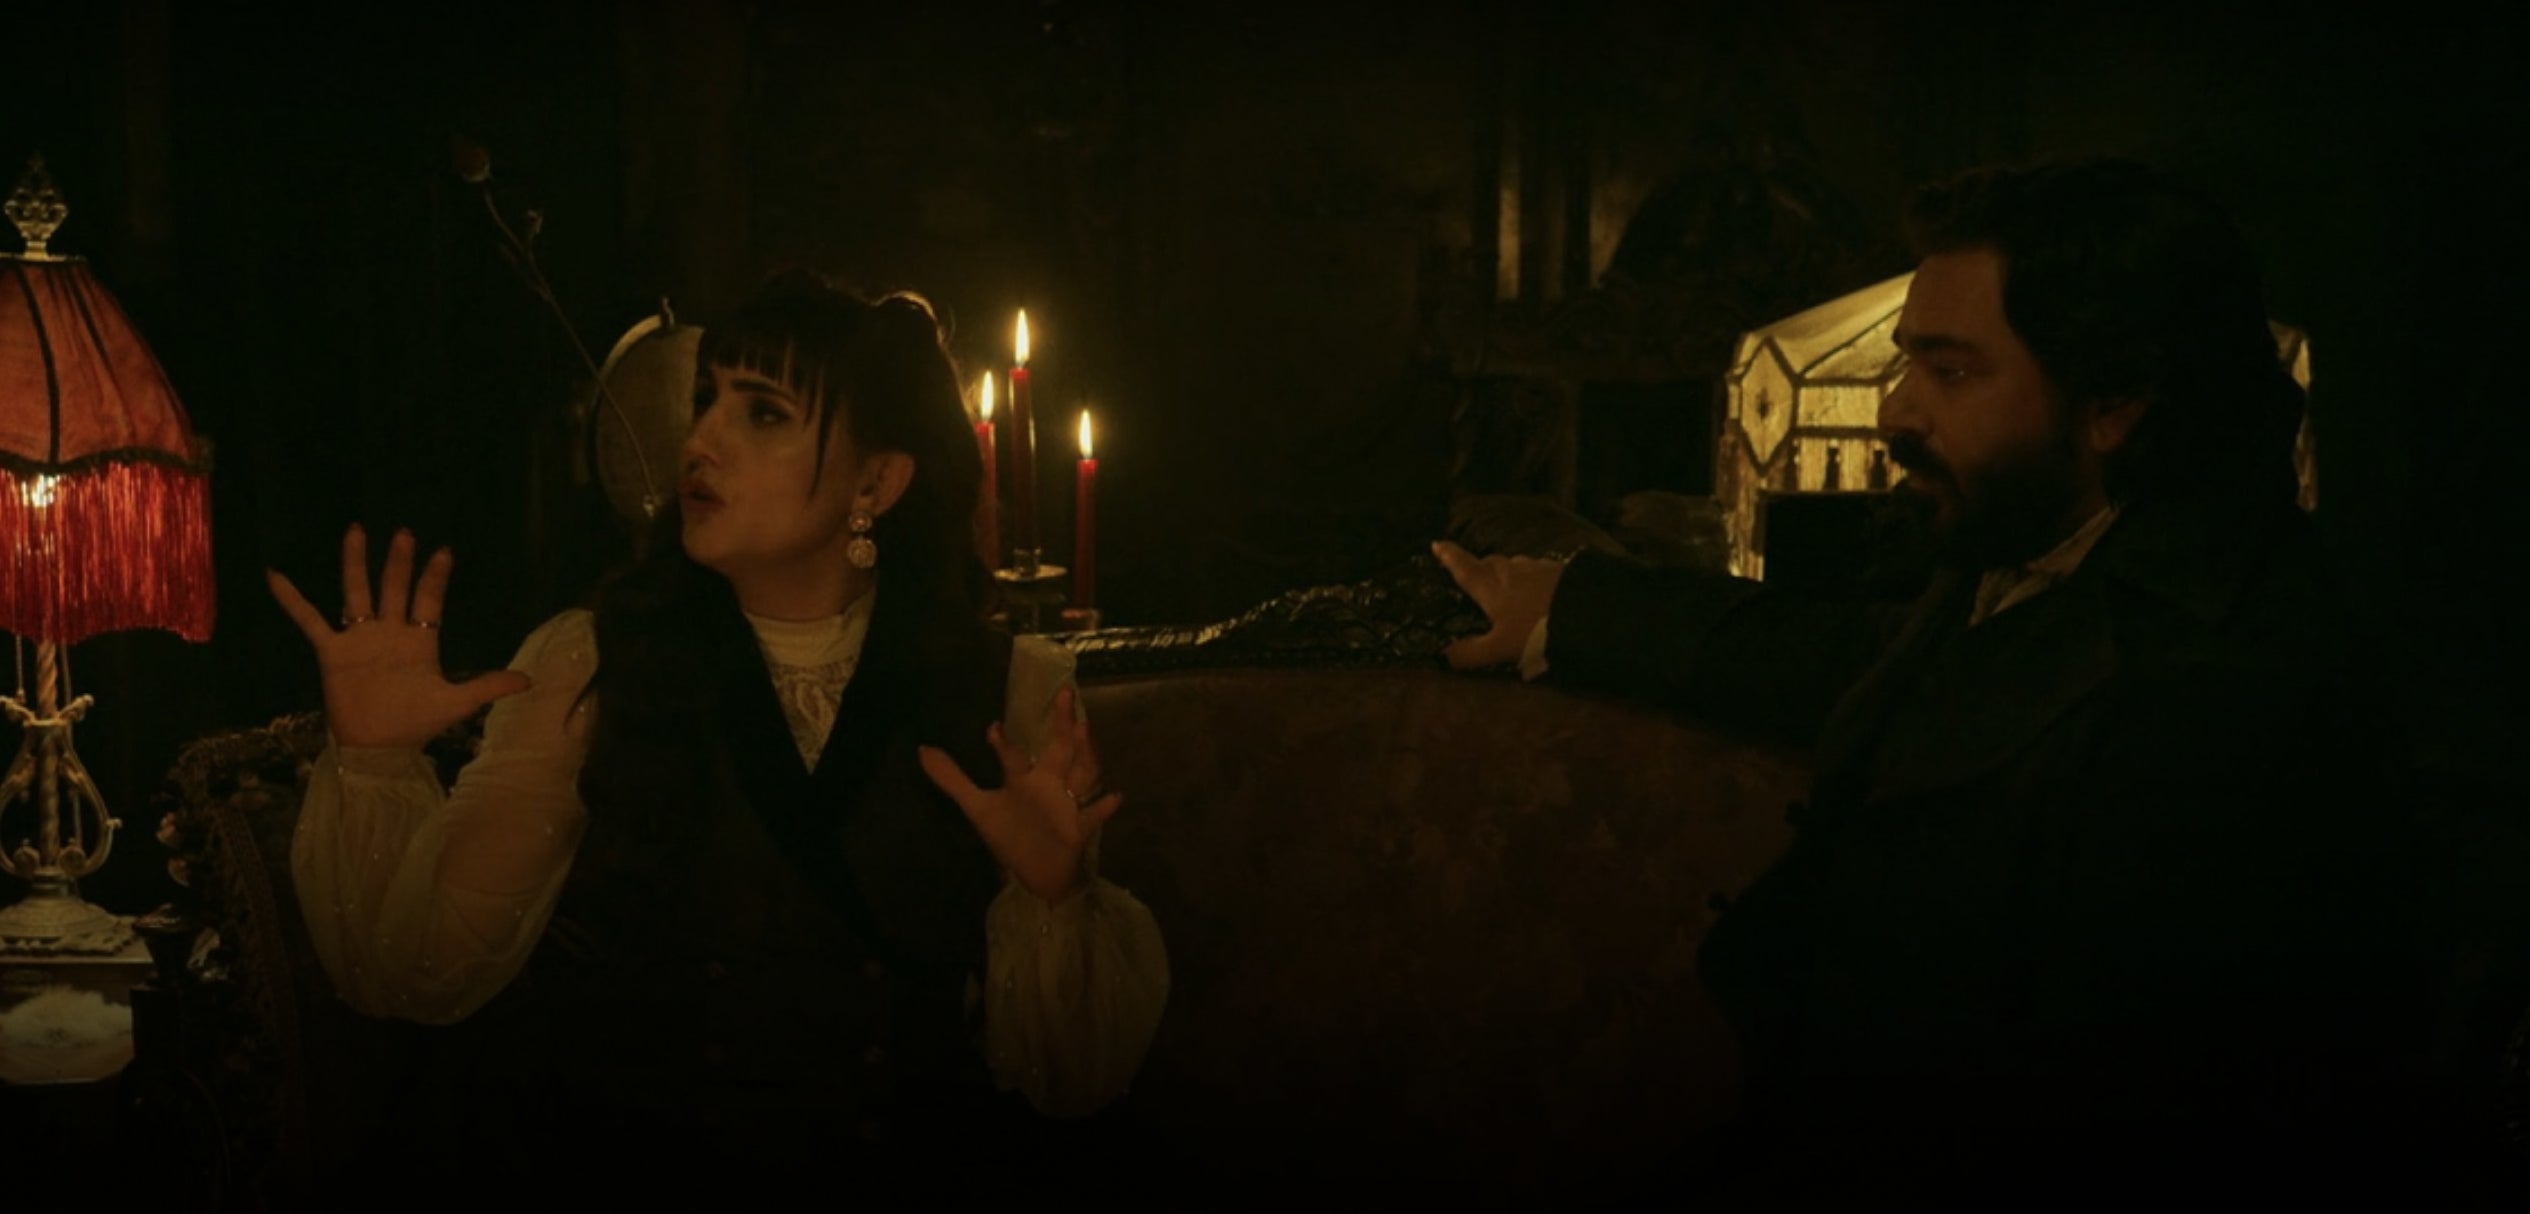 Nadja talking with Laszlo sitting next to her in &quot;What We Do In the Shadows&quot;